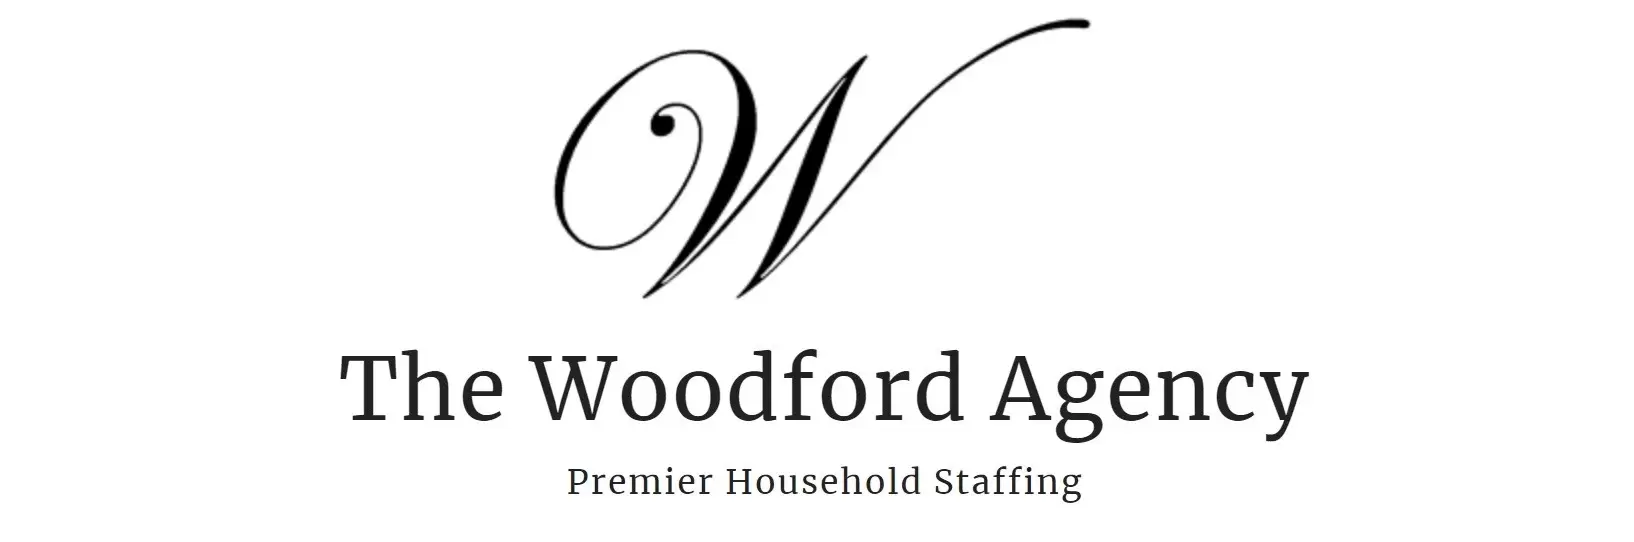 The Woodford Agency company profile and reviews